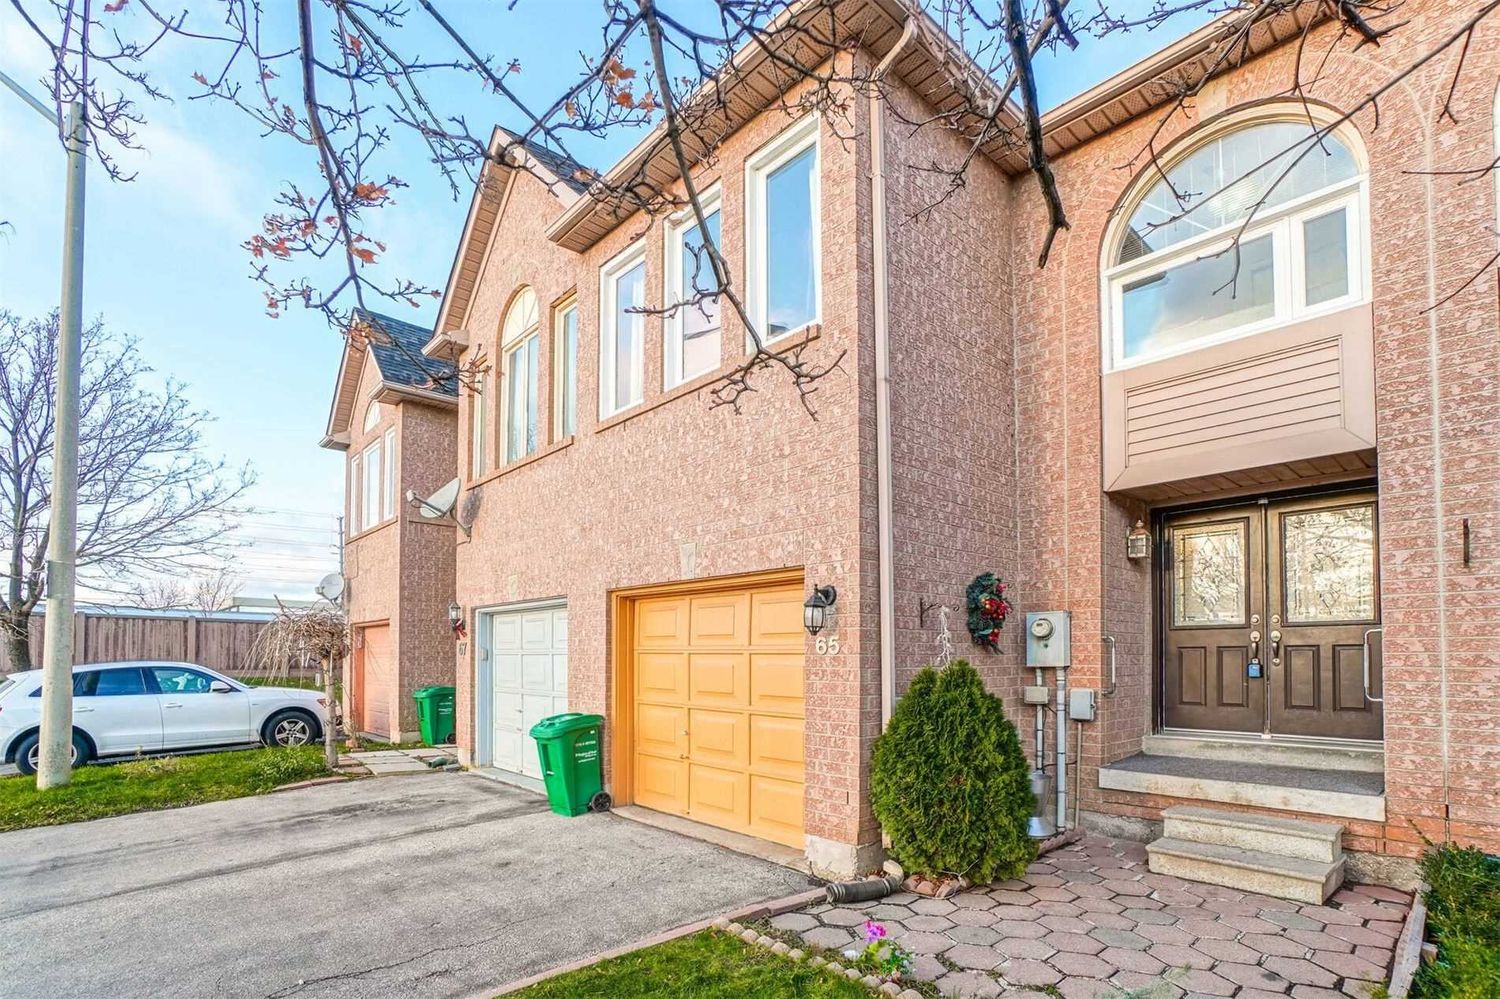 26-38 Cedarwood Crescent. Goldenlight Circle Townhomes is located in  Brampton, Toronto - image #1 of 2